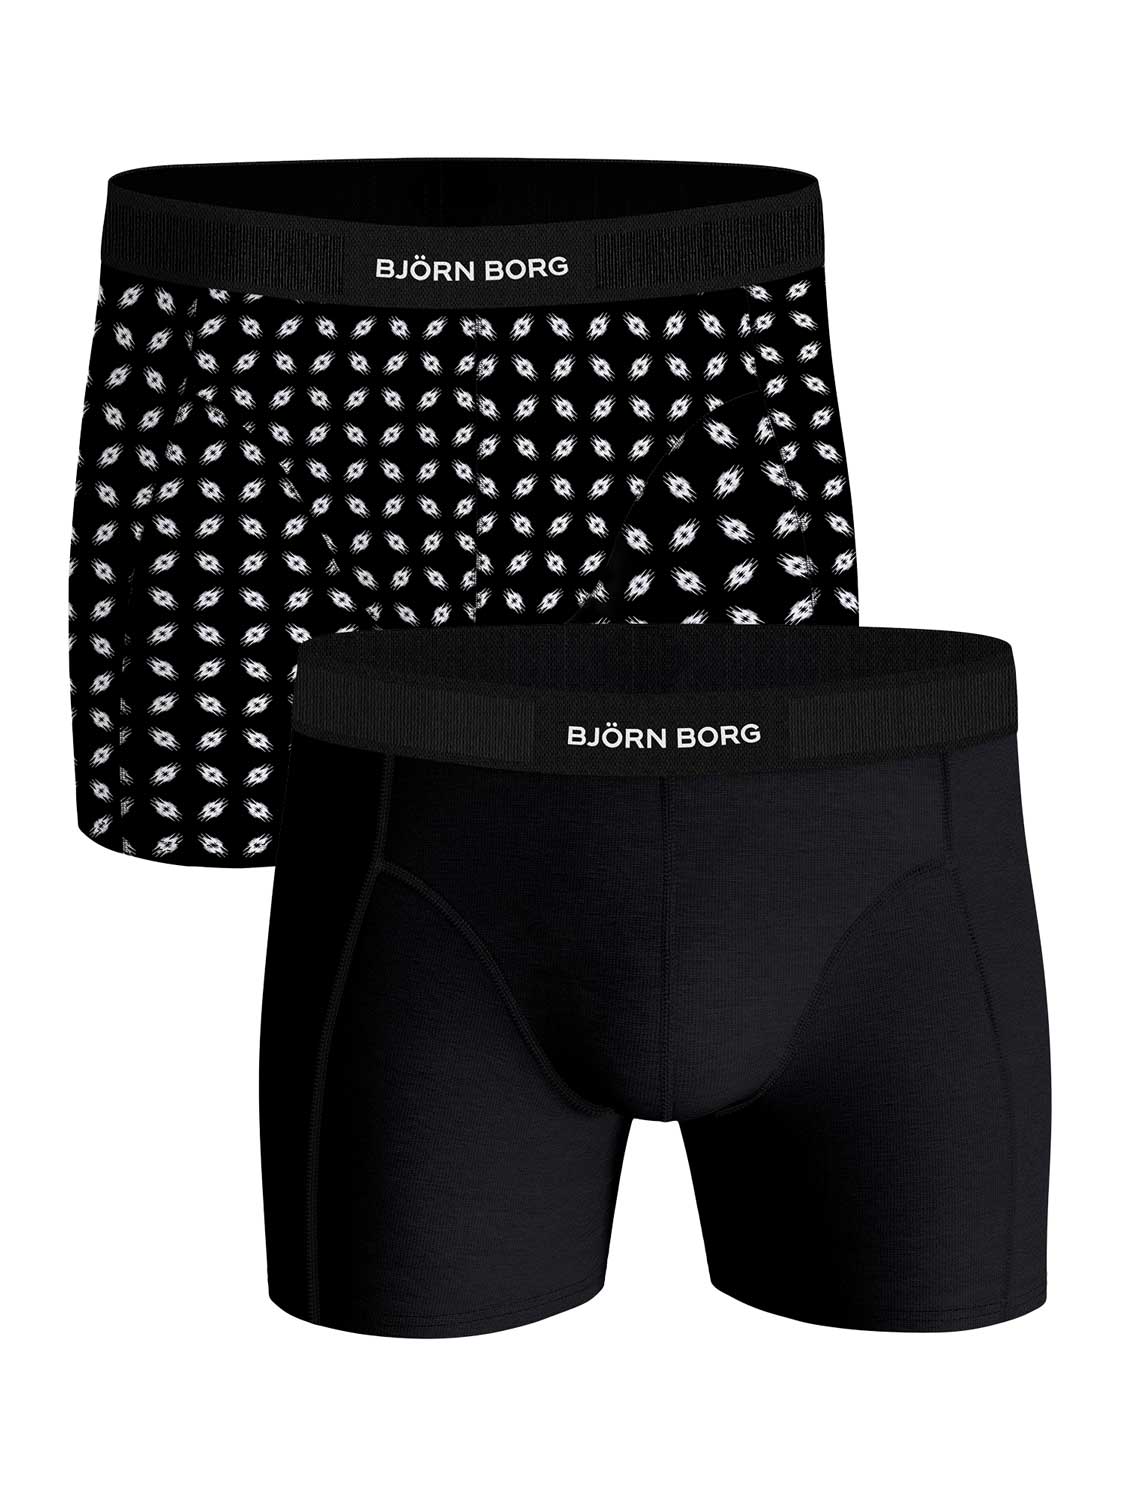 Björn Borg Cotton Stretch boxers - heren boxers normale lengte (2-pack) - multicolor - Maat: XL